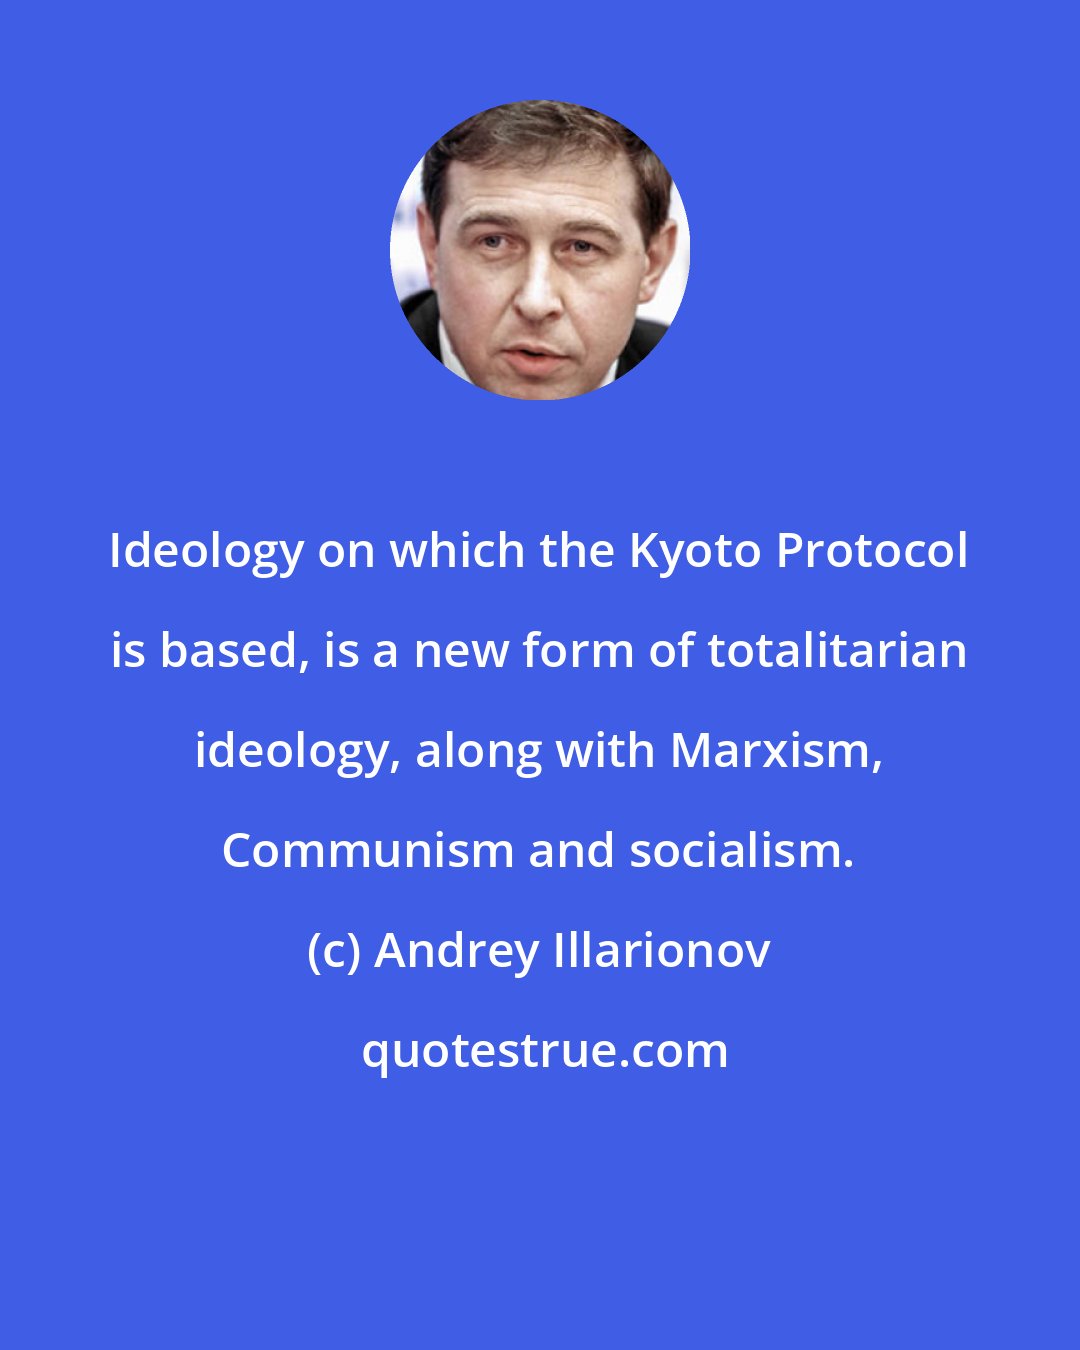 Andrey Illarionov: Ideology on which the Kyoto Protocol is based, is a new form of totalitarian ideology, along with Marxism, Communism and socialism.